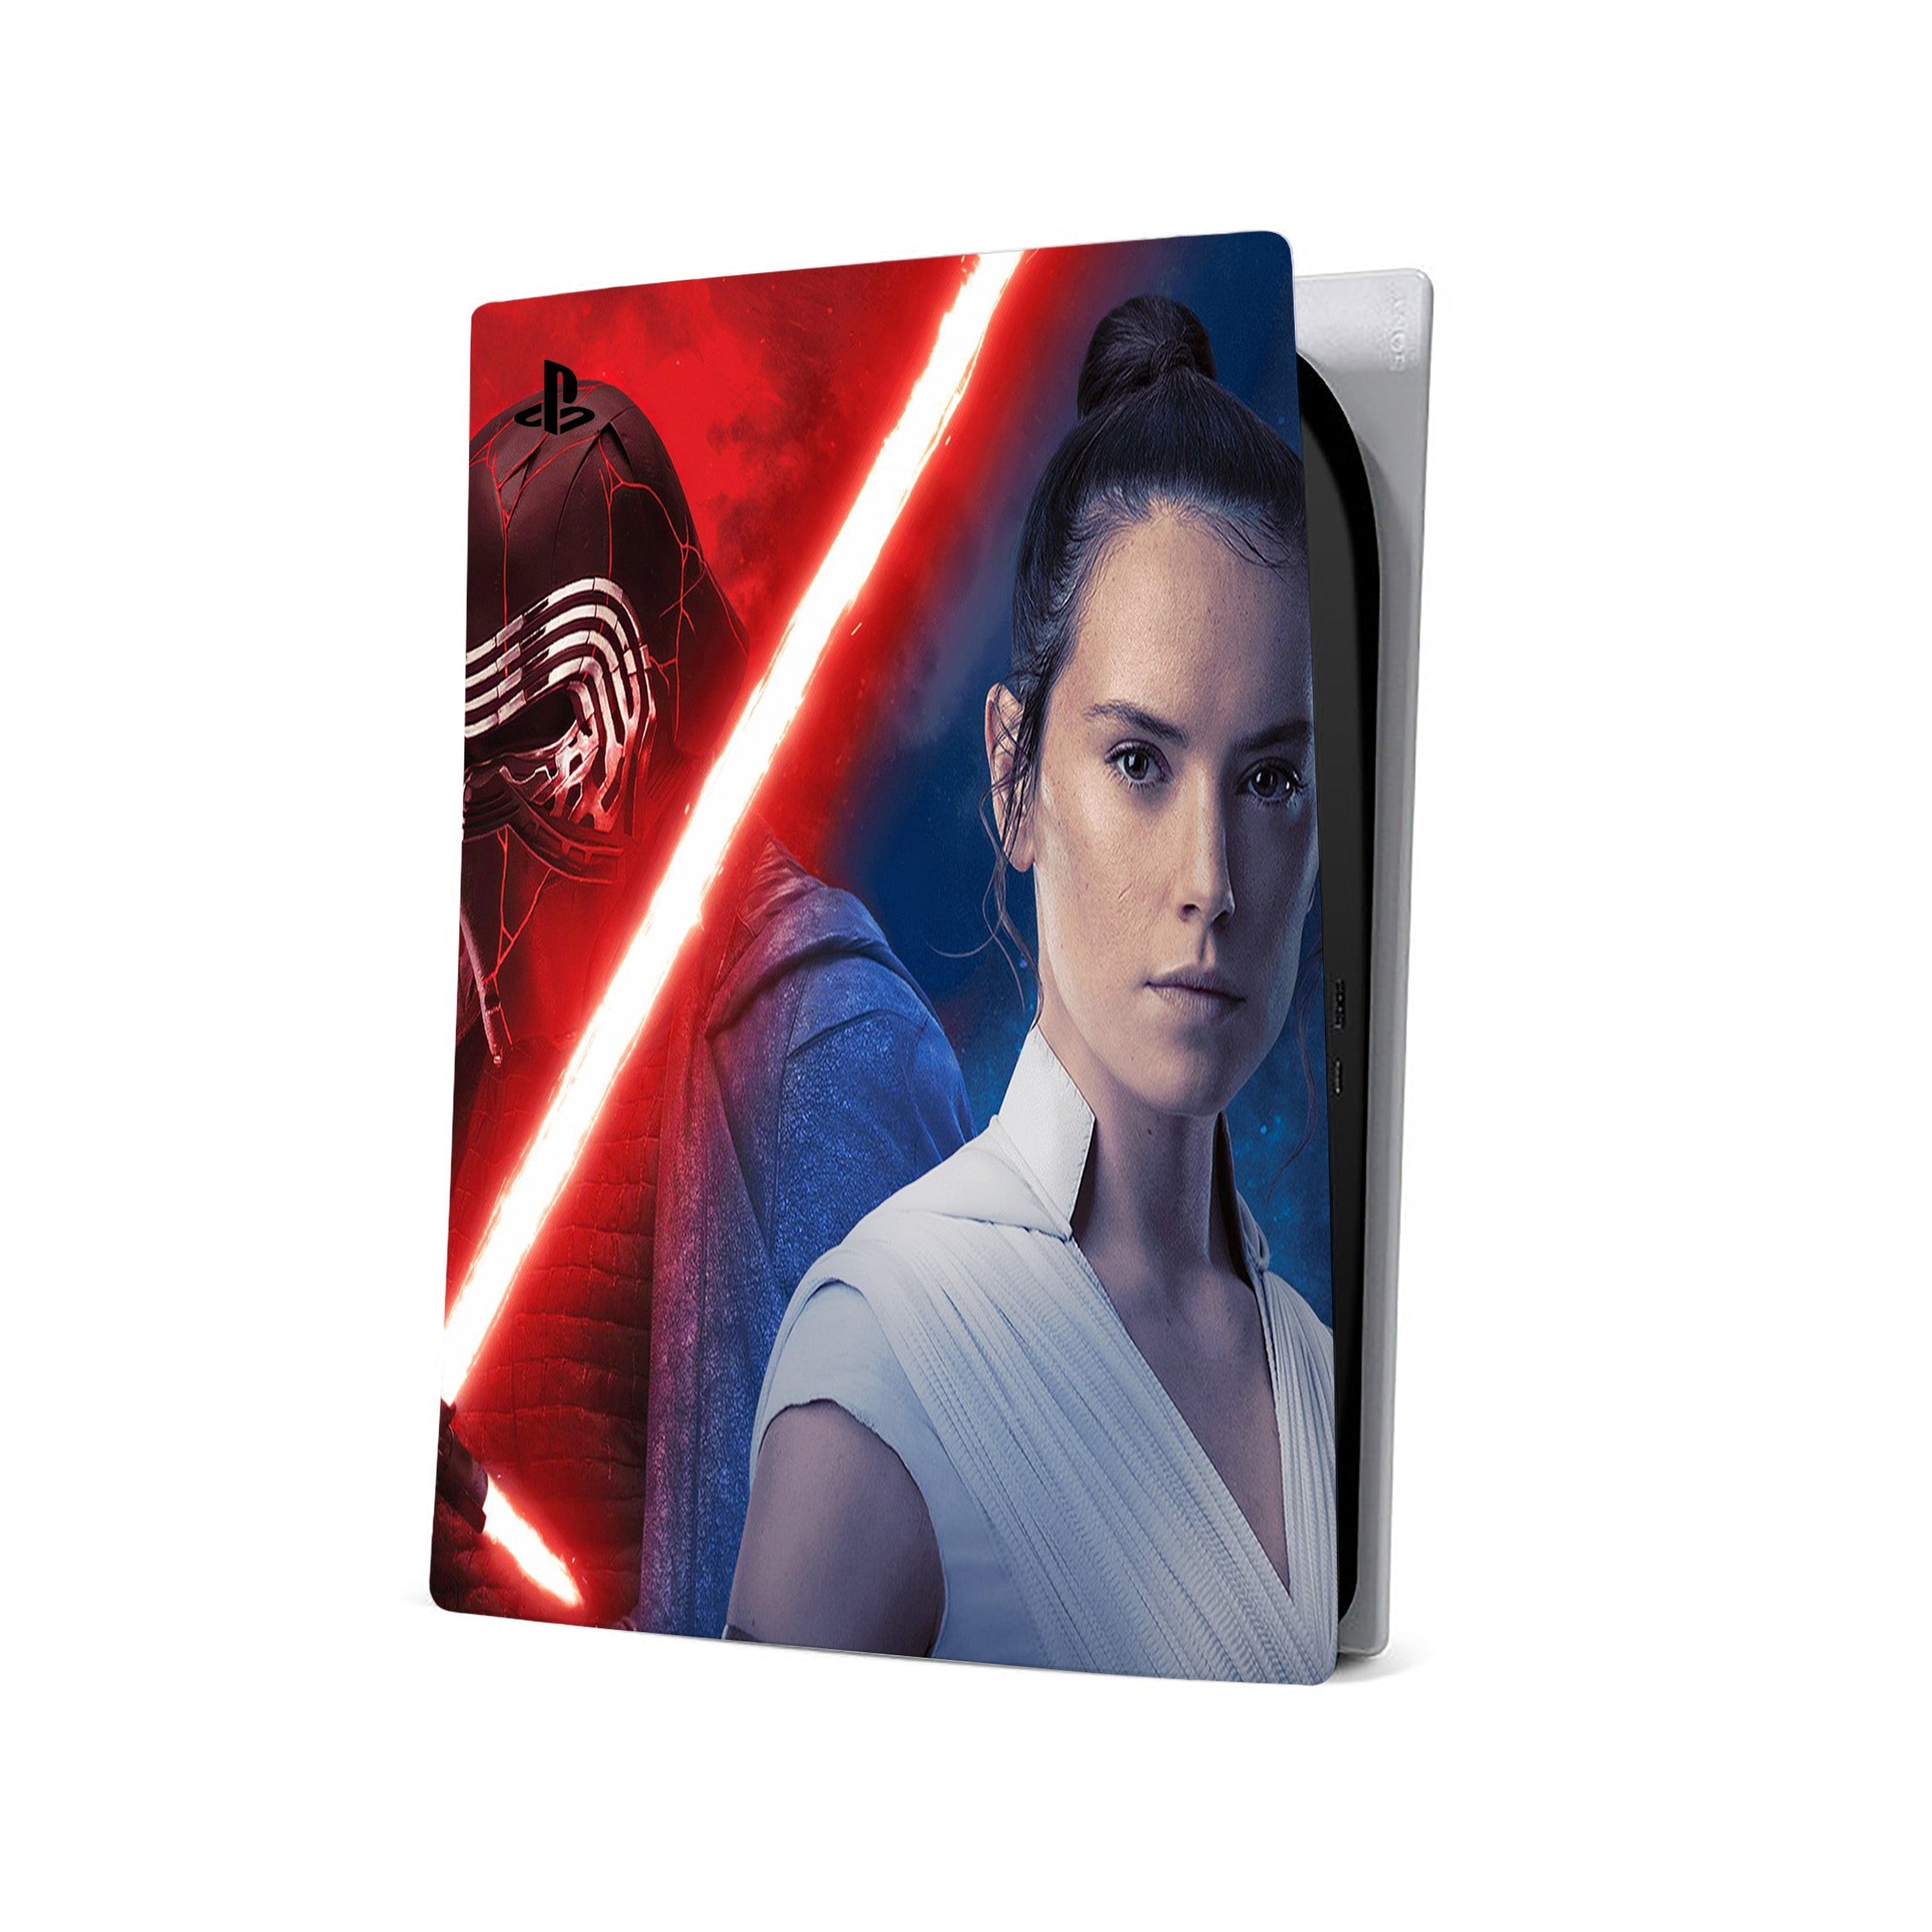 A video game skin featuring a Star Wars design for the PS5.